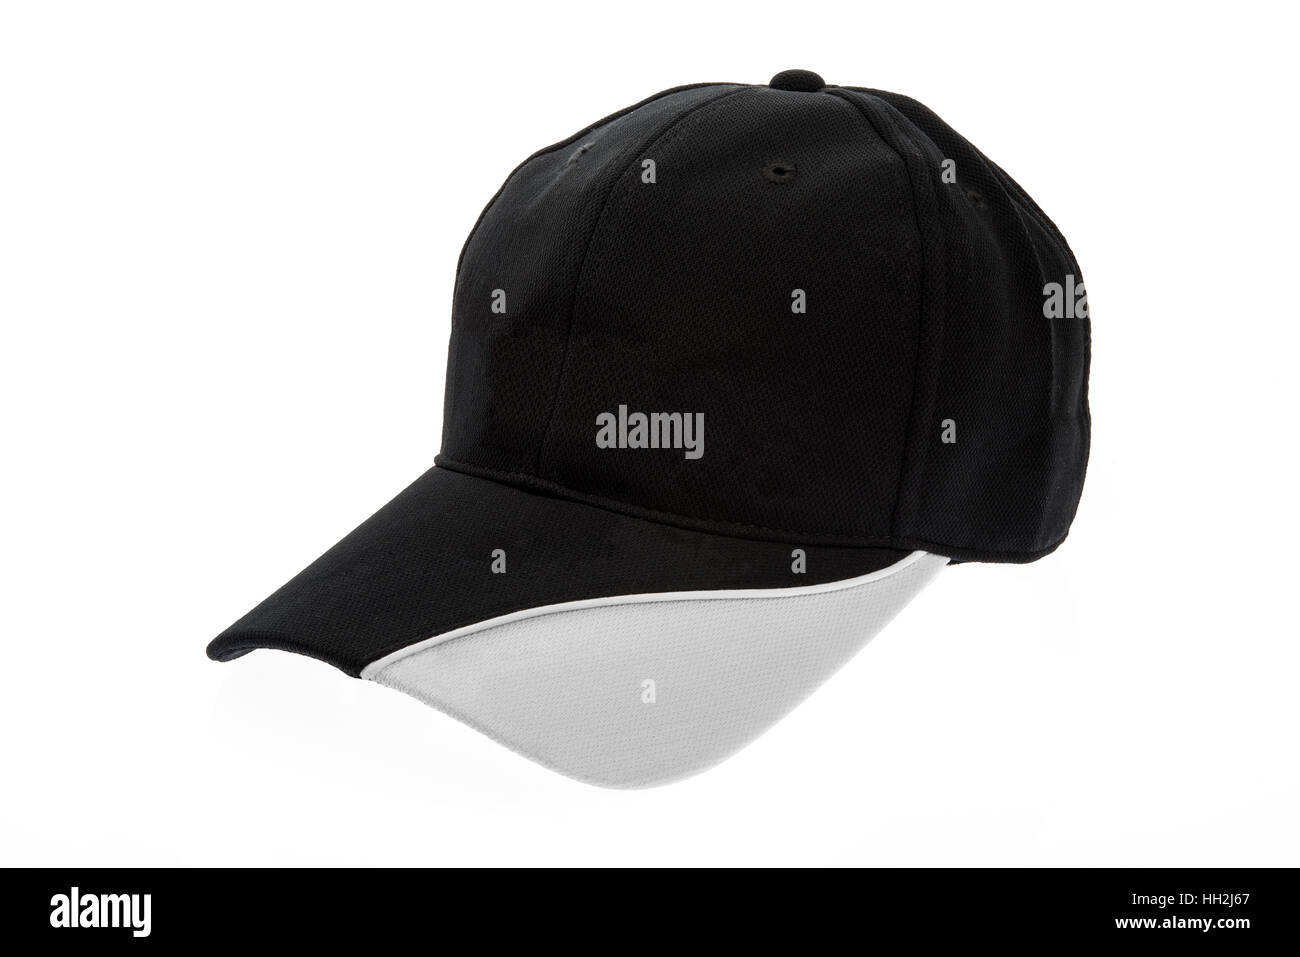 Golf cap black and white for man on white background Stock Photo